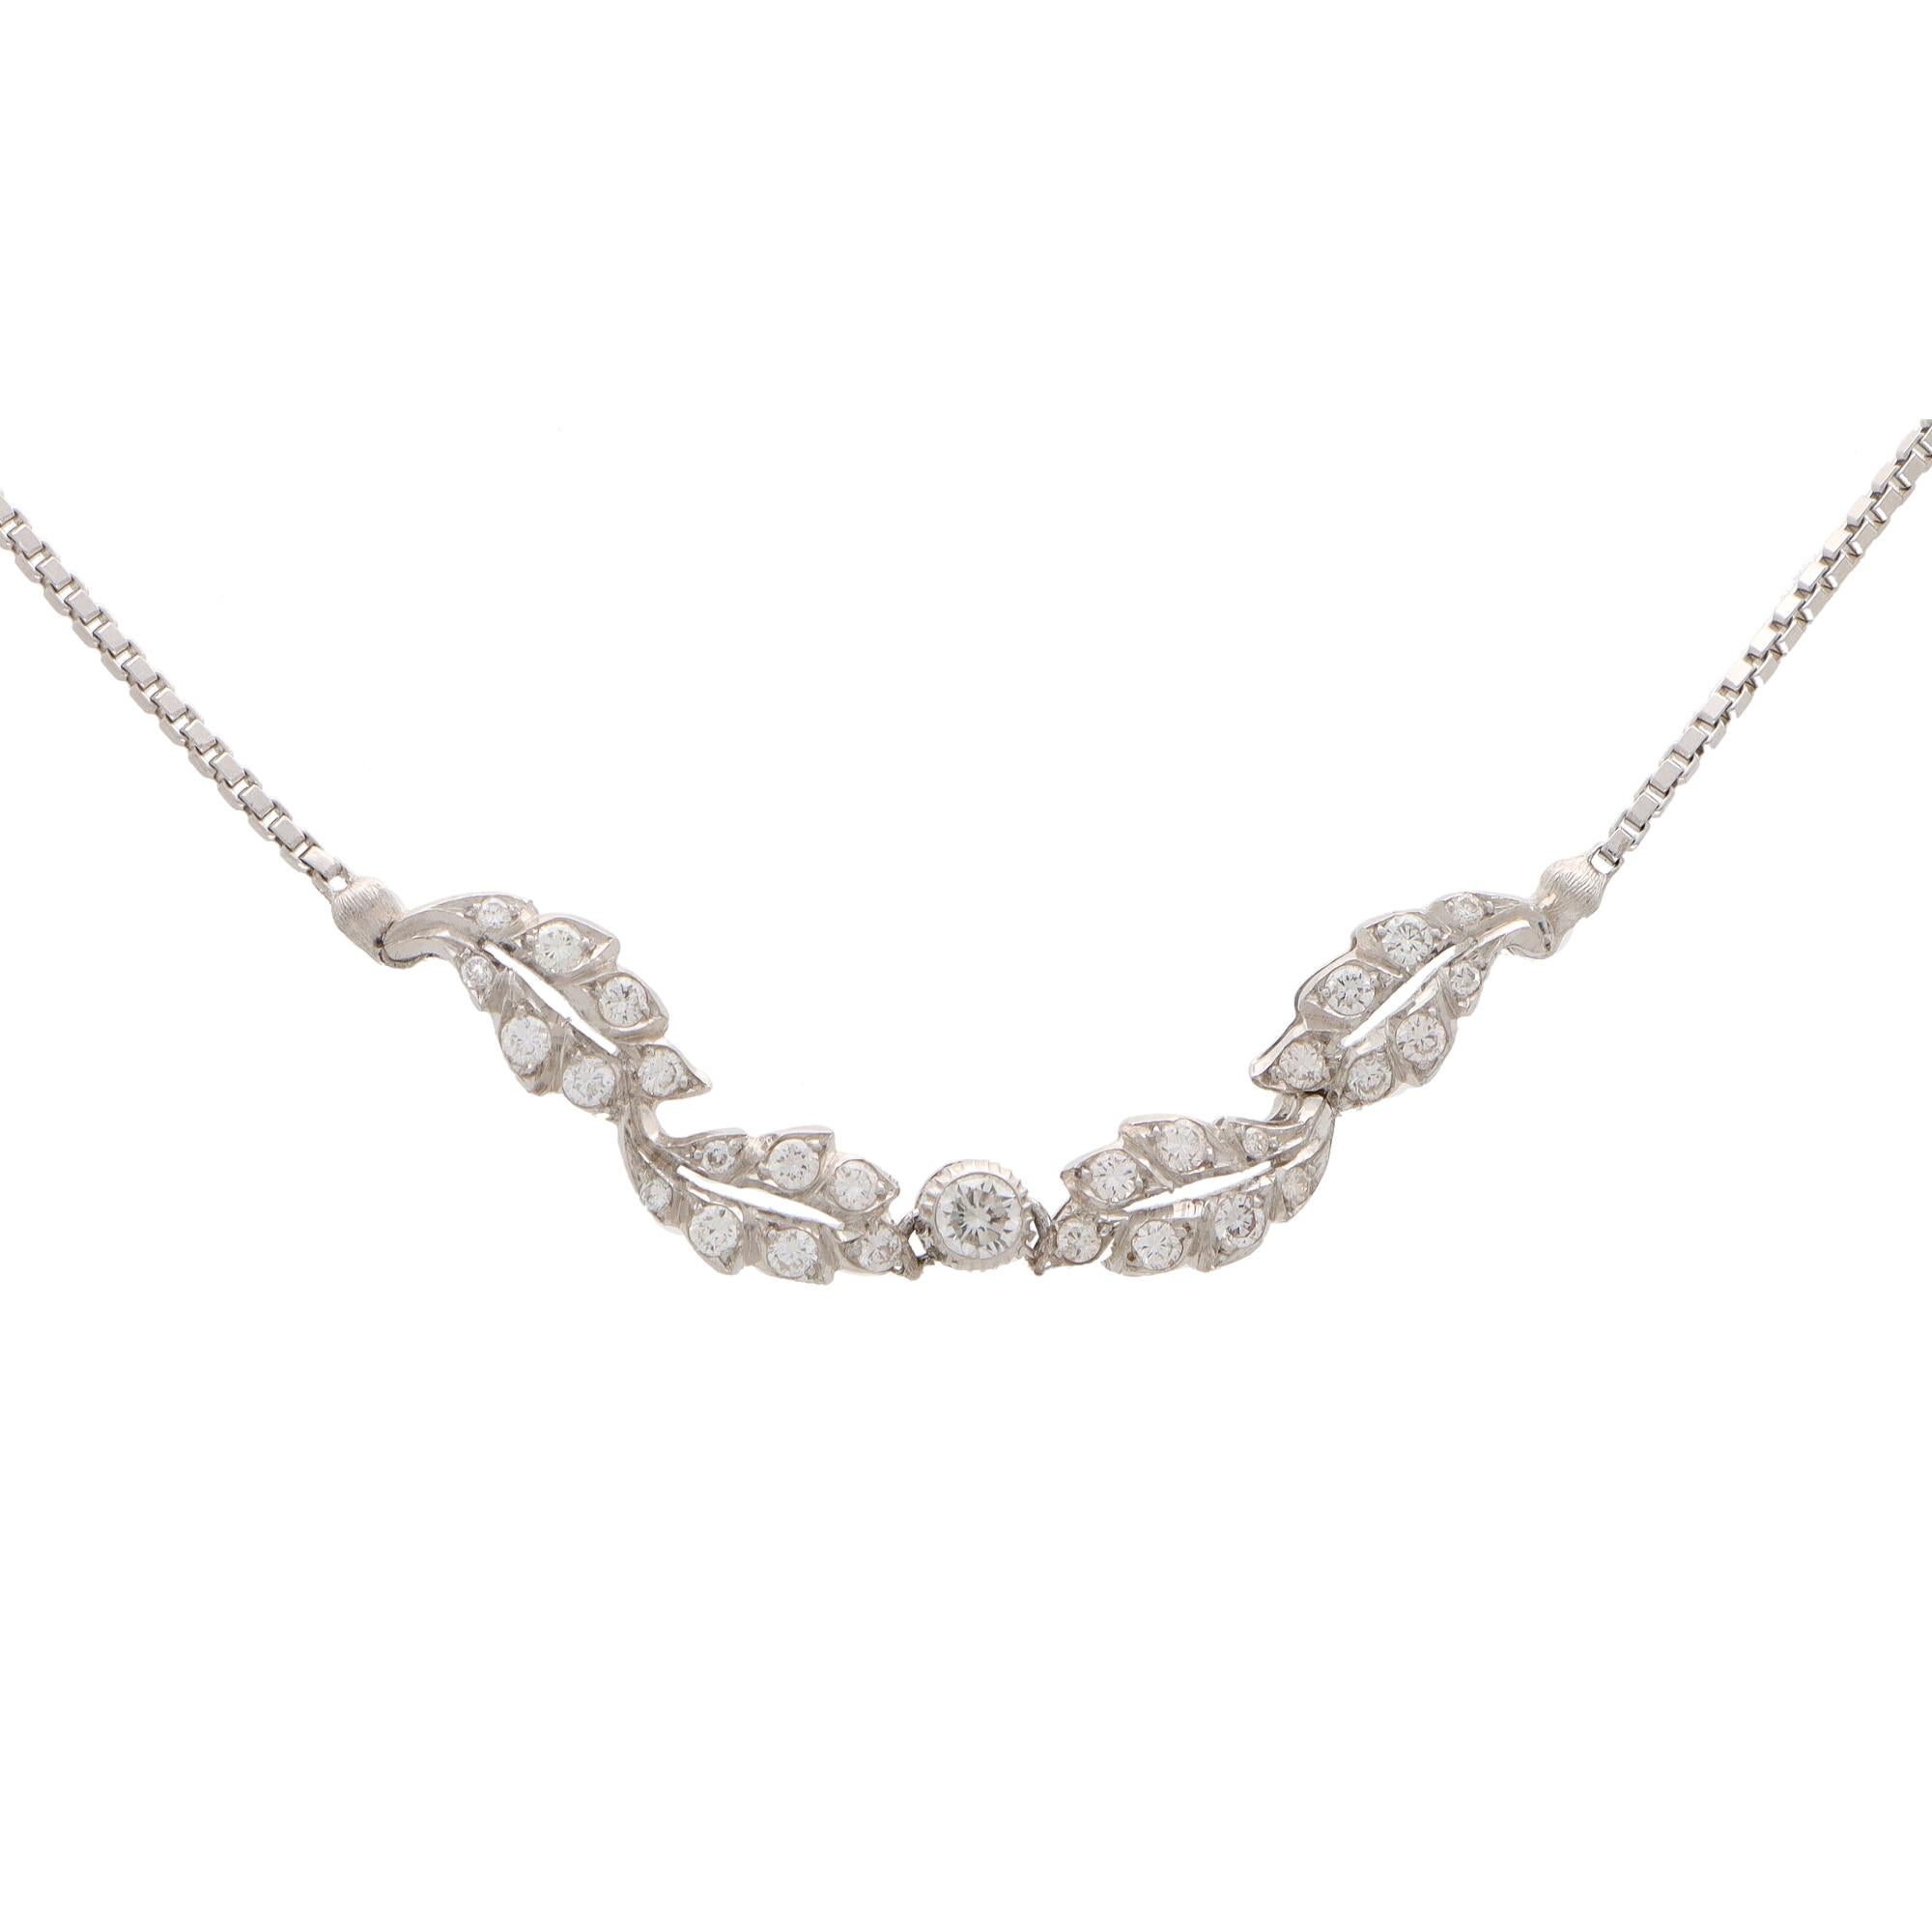 Modern Vintage Buccellati 'Les Amoureux' Diamond Pendant Necklace in 18k White Gold For Sale